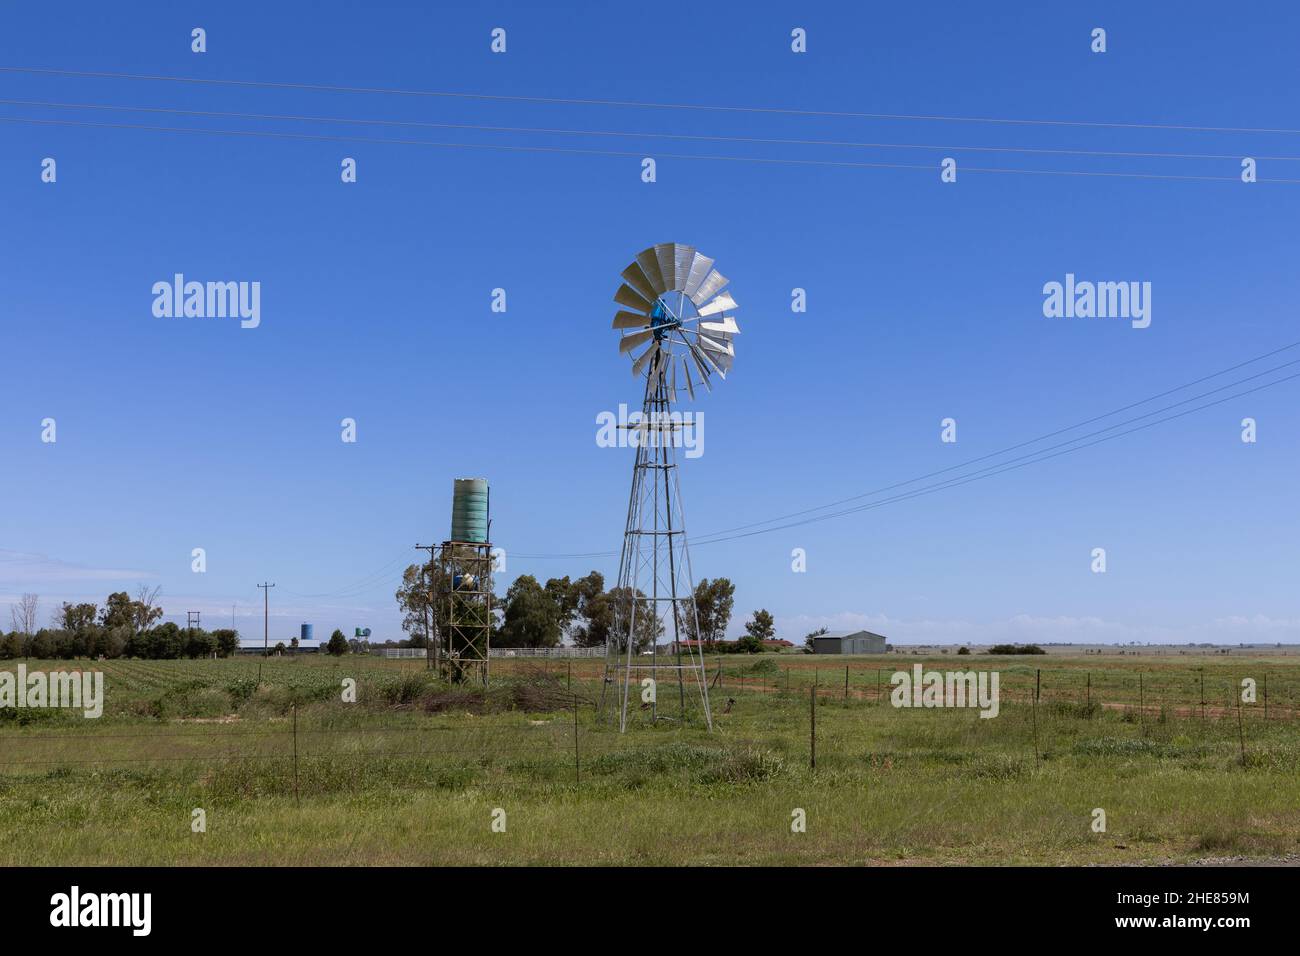 Wind pump also known as a wind mill in a rural area, being it is a green plastic storage tank to contain the water that is extracted from the earth Stock Photo